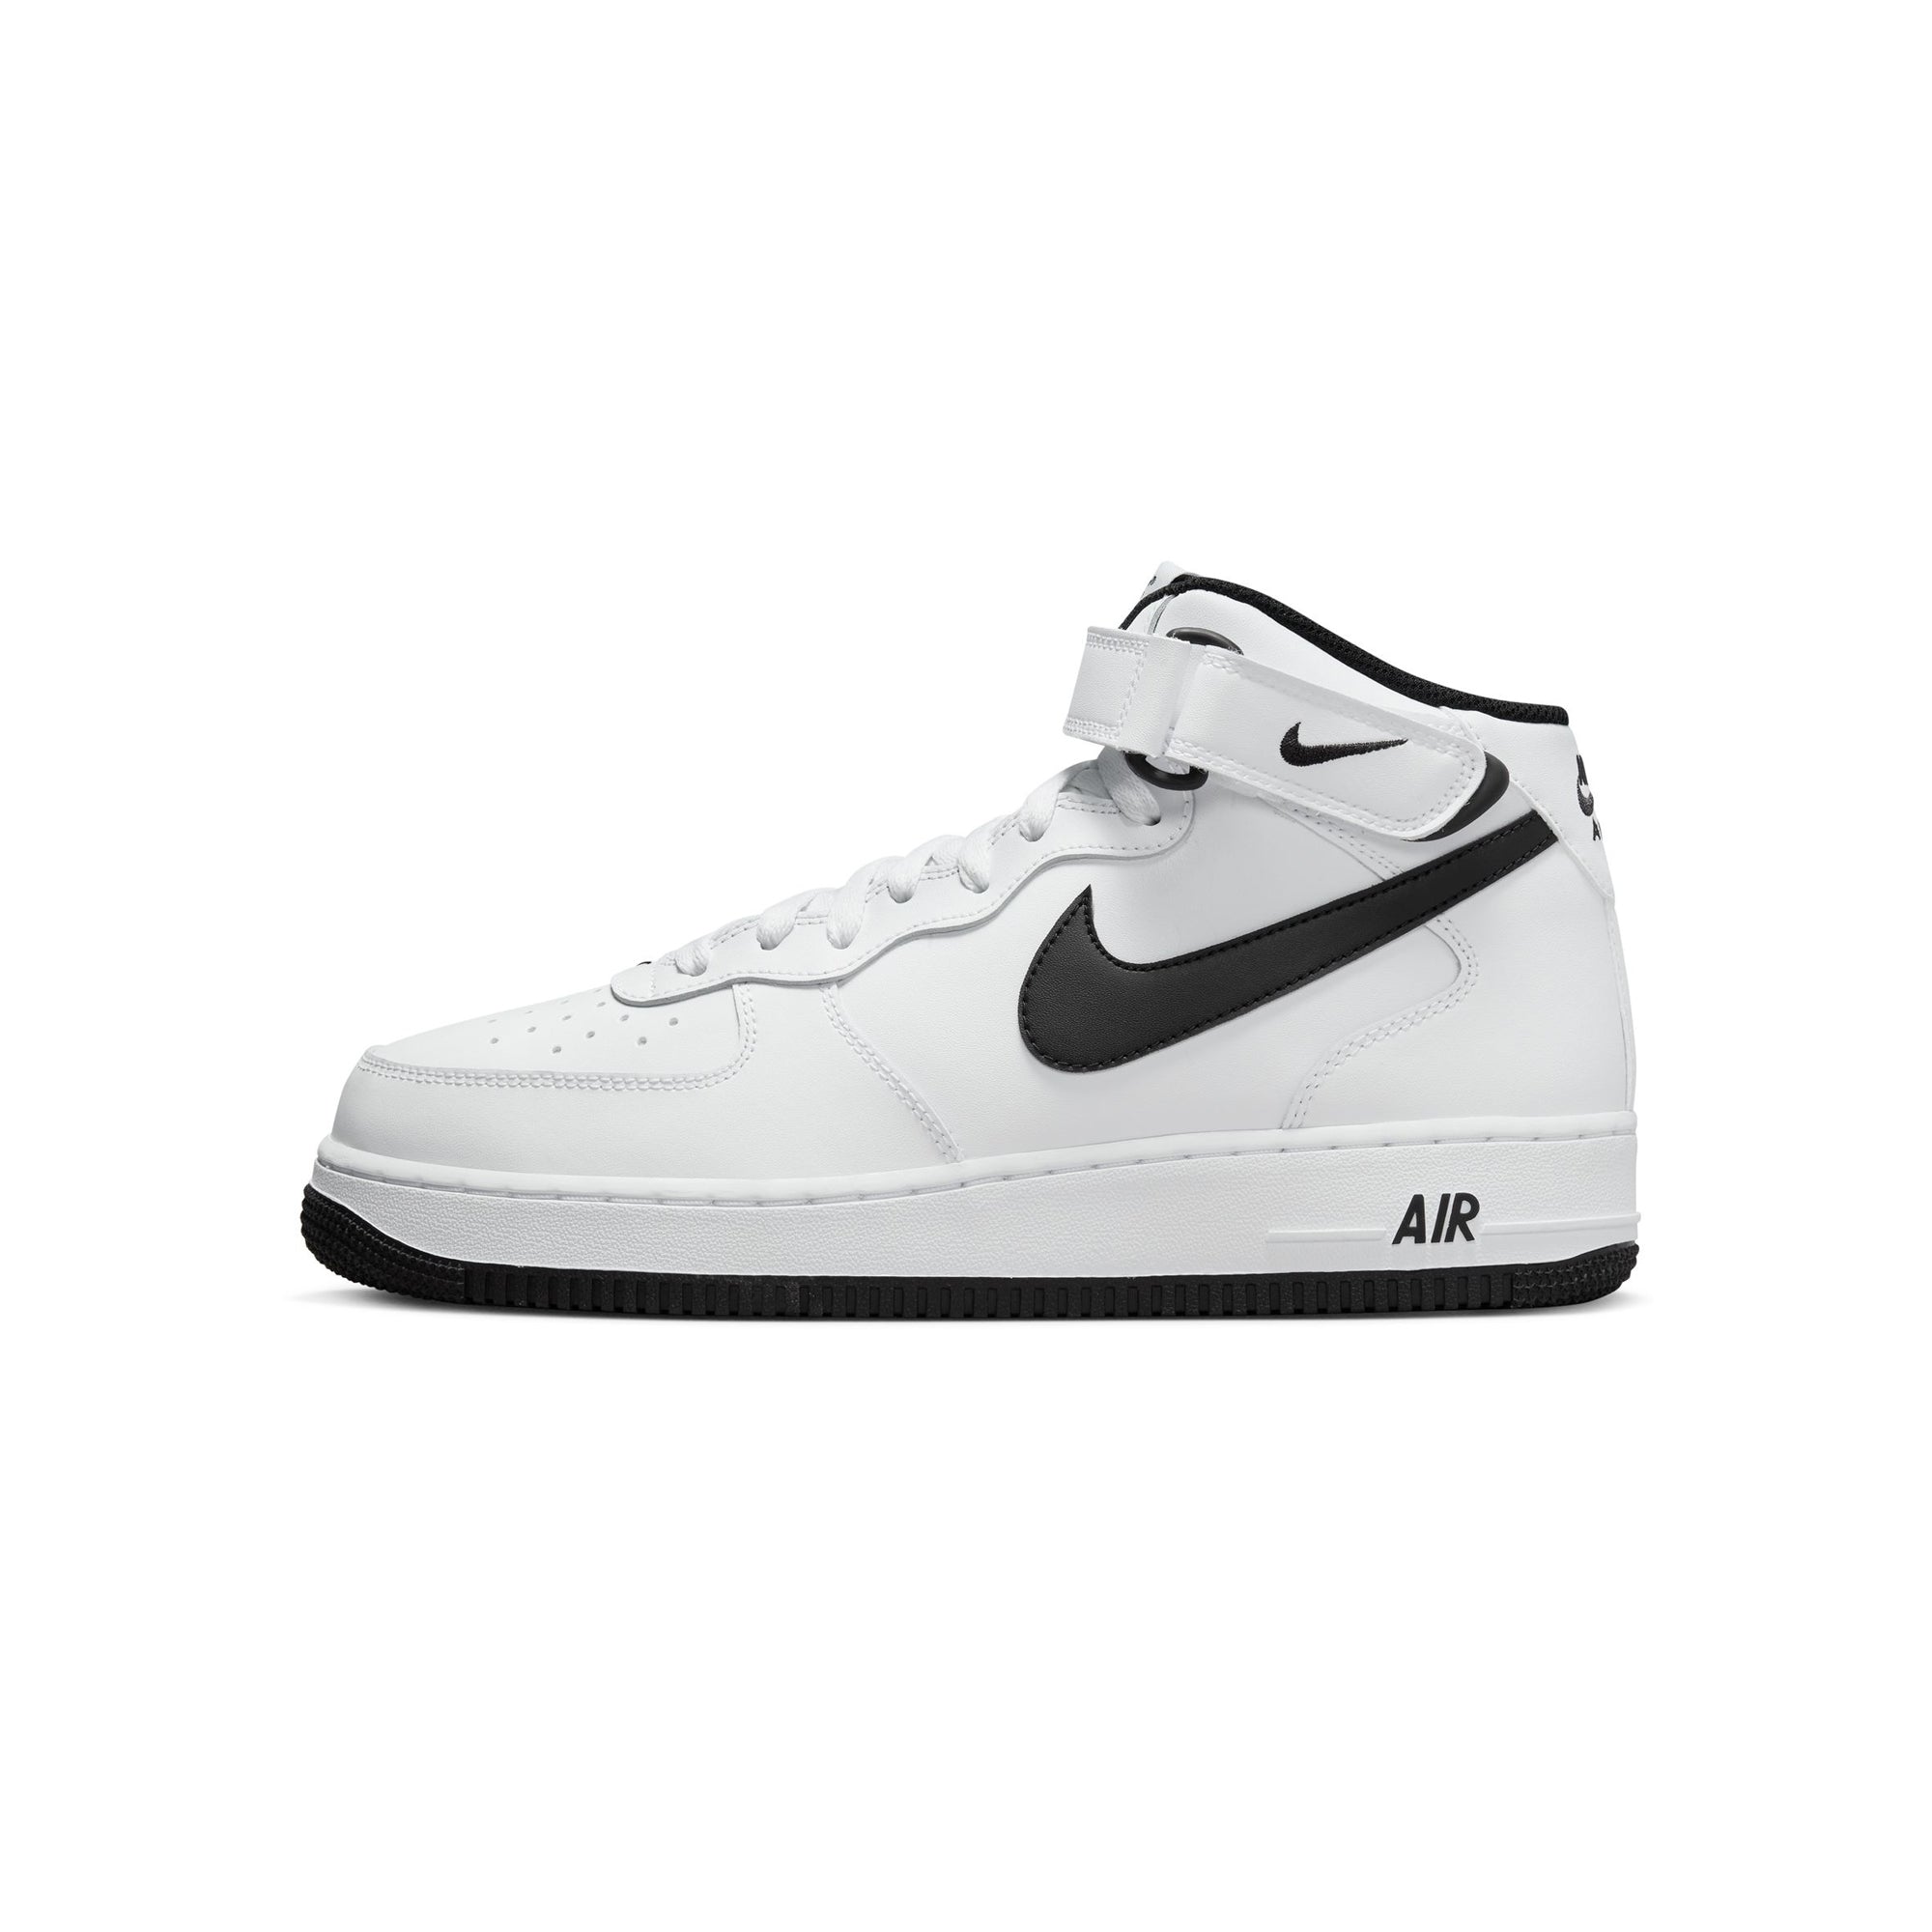 Outfit ideas - How to wear NIKE AIR FORCE 1 MID '07 (WHITE/WHITE